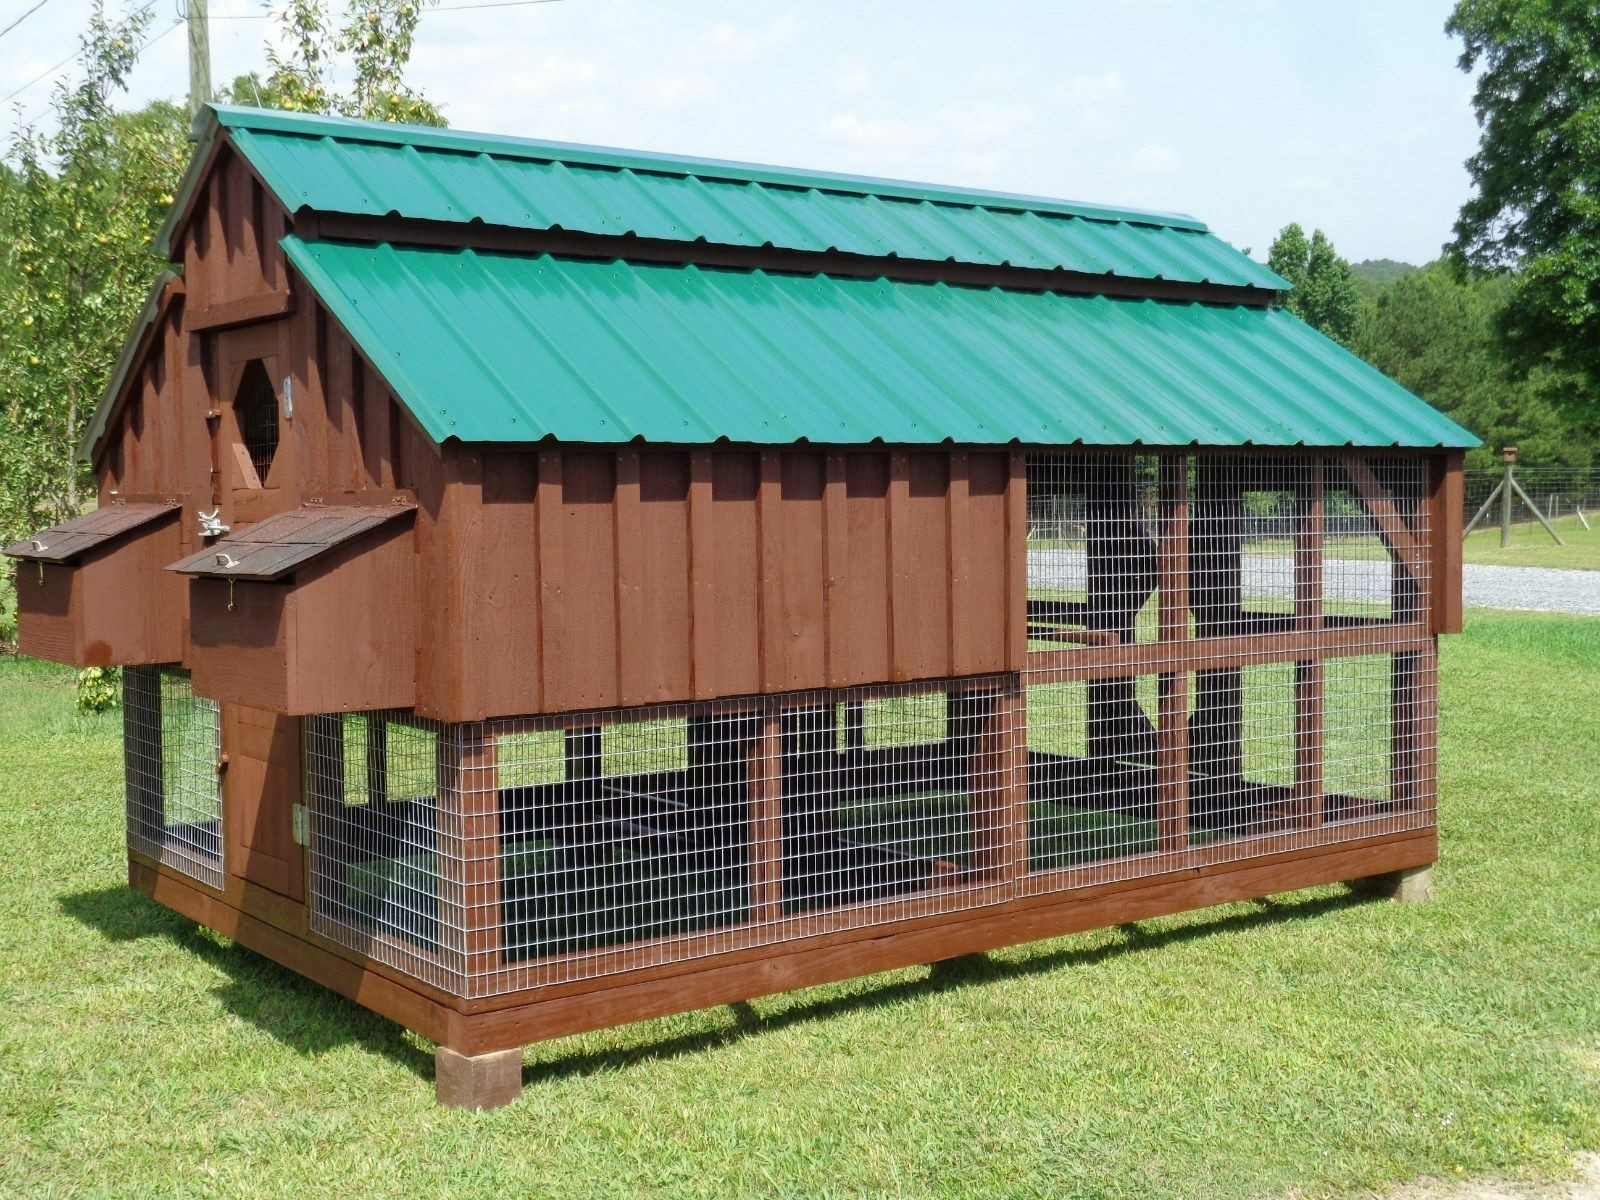 Backyard Chicken Coop Designs
 How to Build a Backyard Chicken Coop